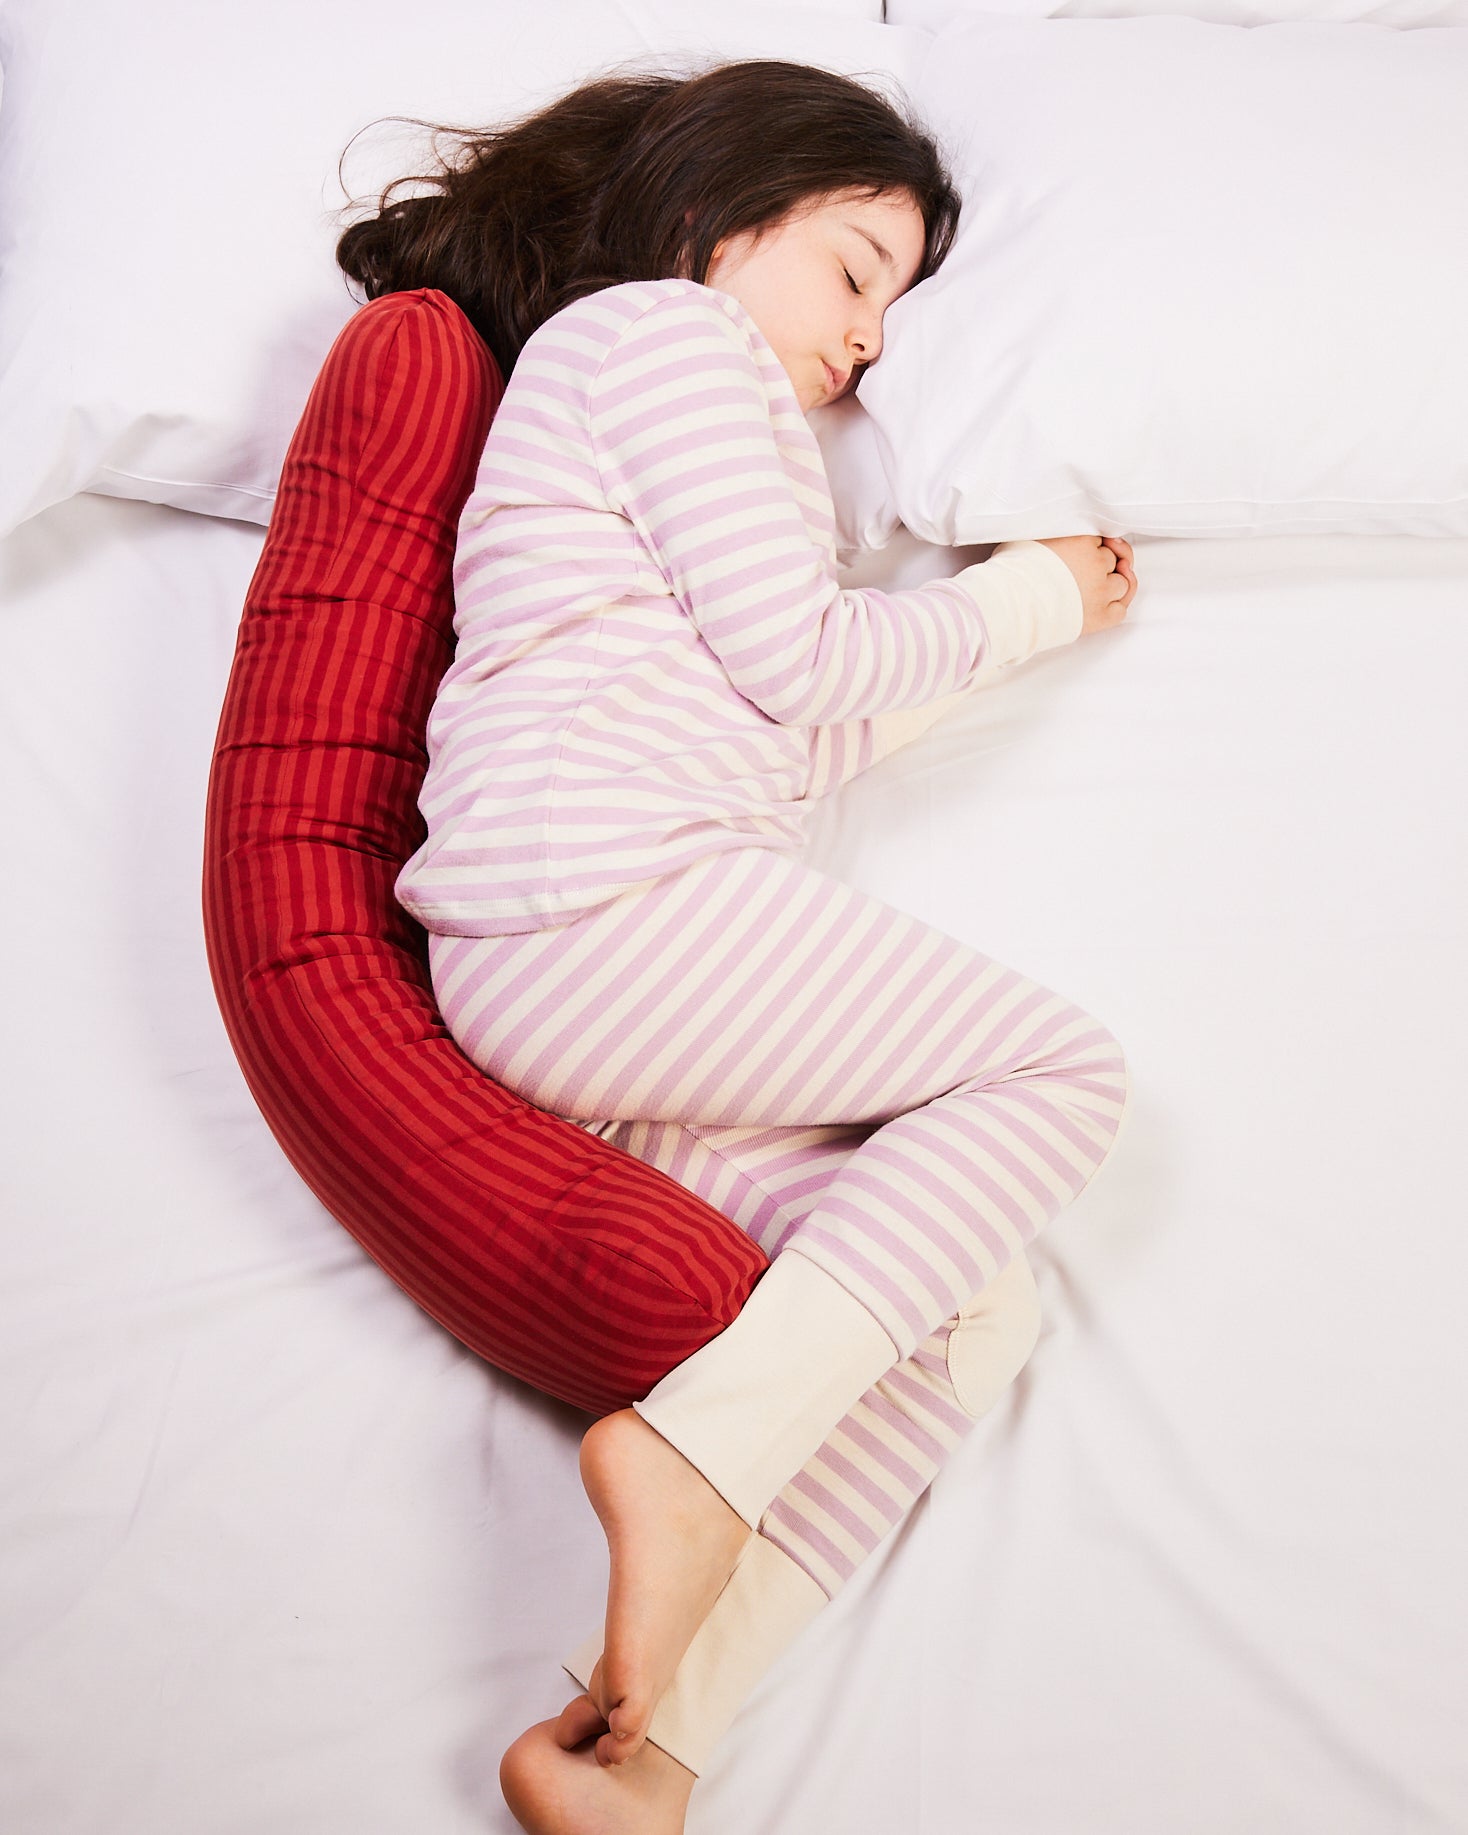 Young girl sleeping with the red weighted pillow